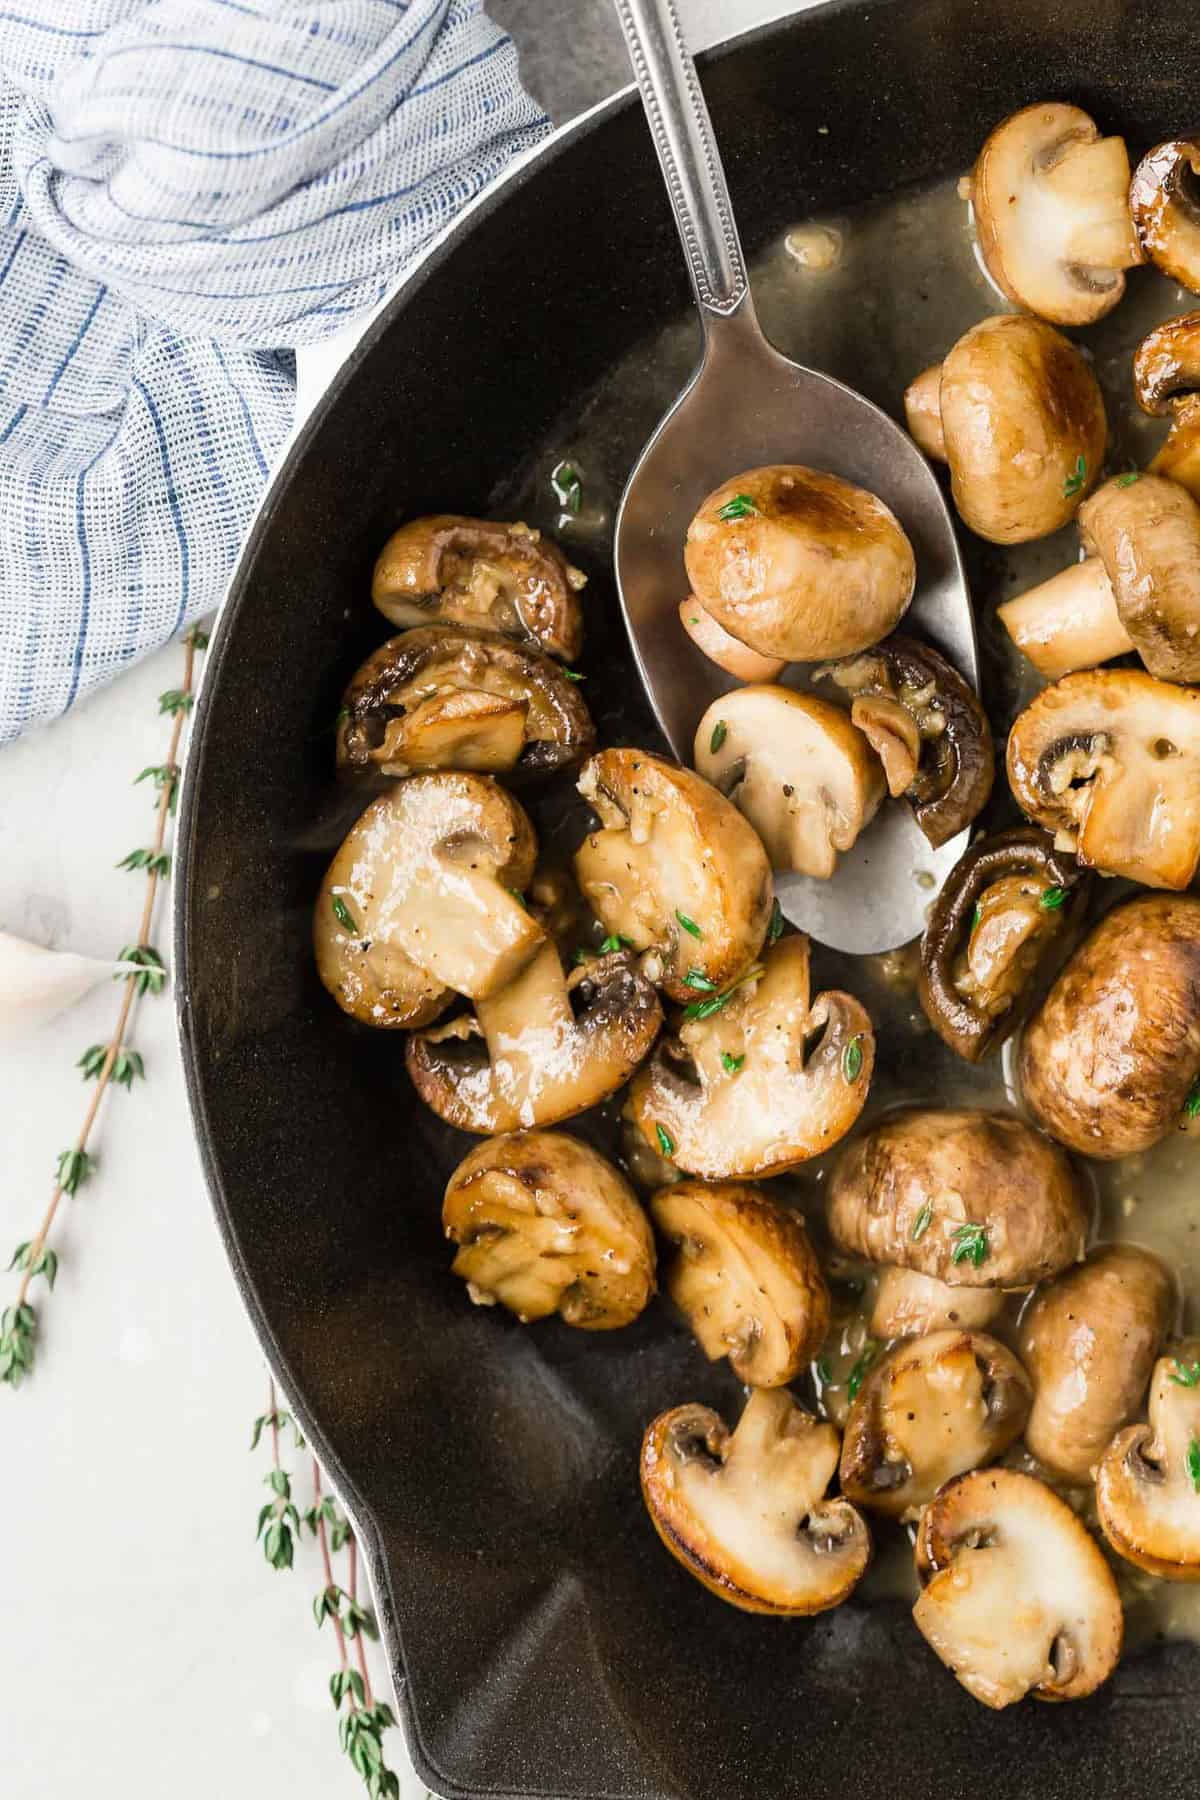 Cooked mushrooms in a butter sauce in a black pan.